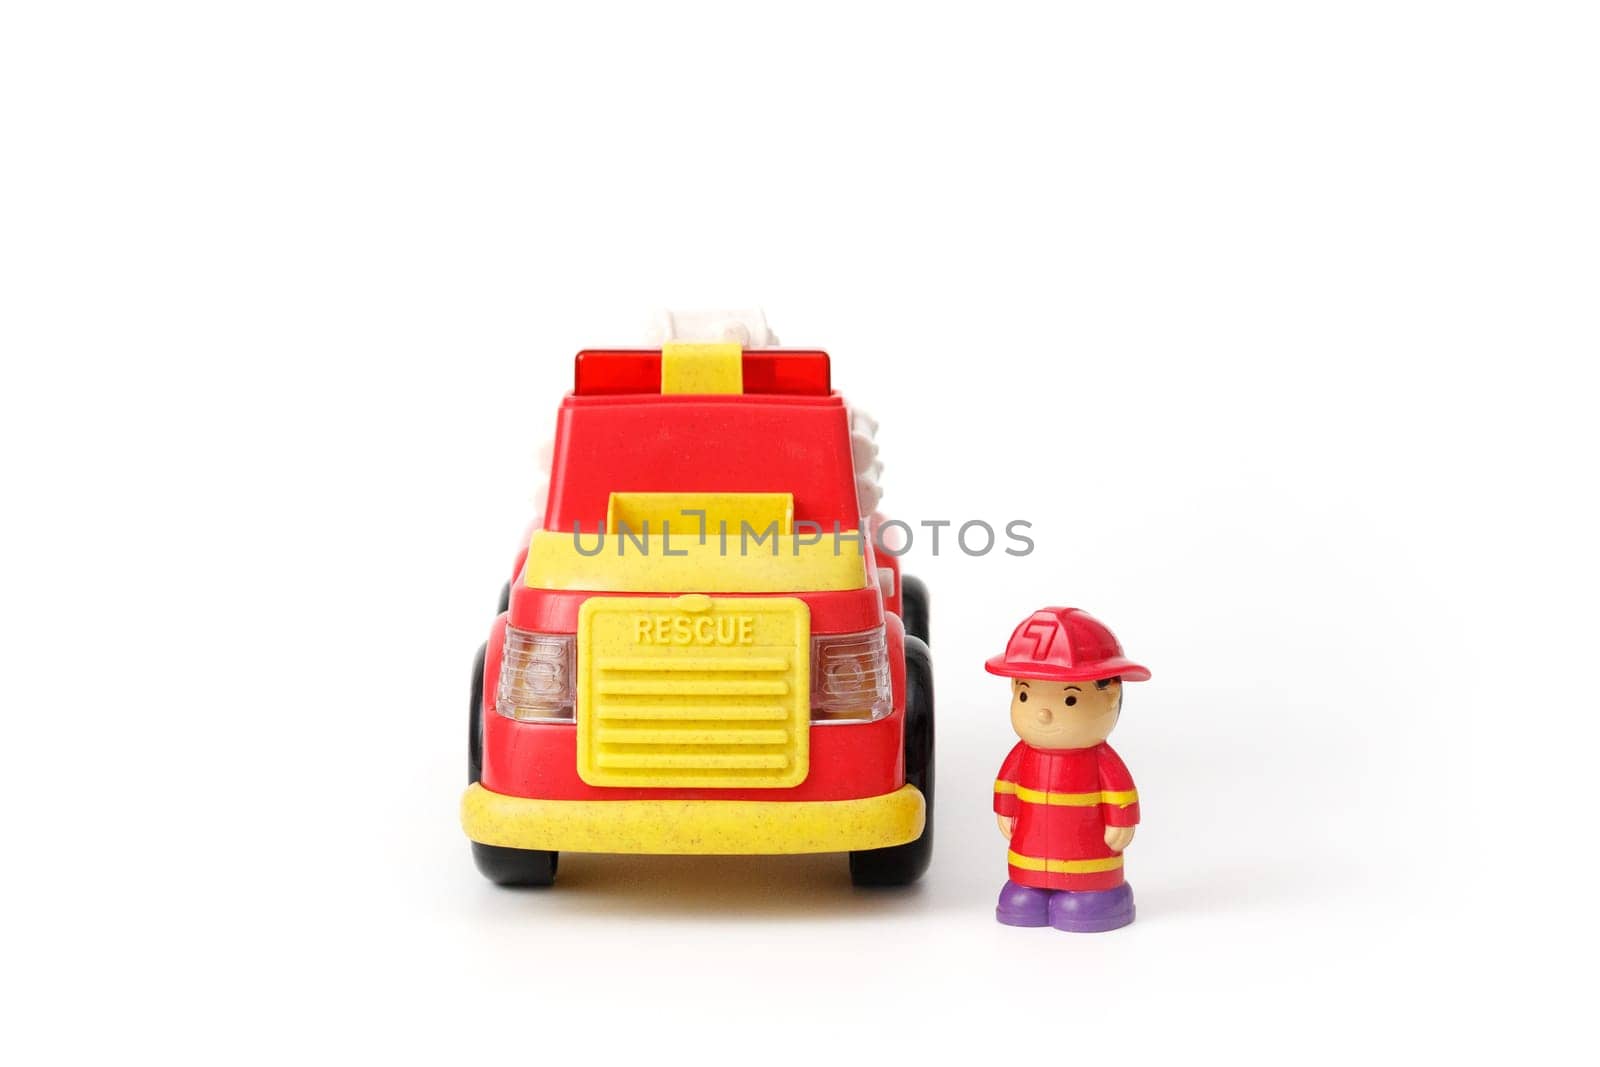 Children's toy red fire truck with a fireman in uniform standing next to him, isolated on whire background by Rom4ek